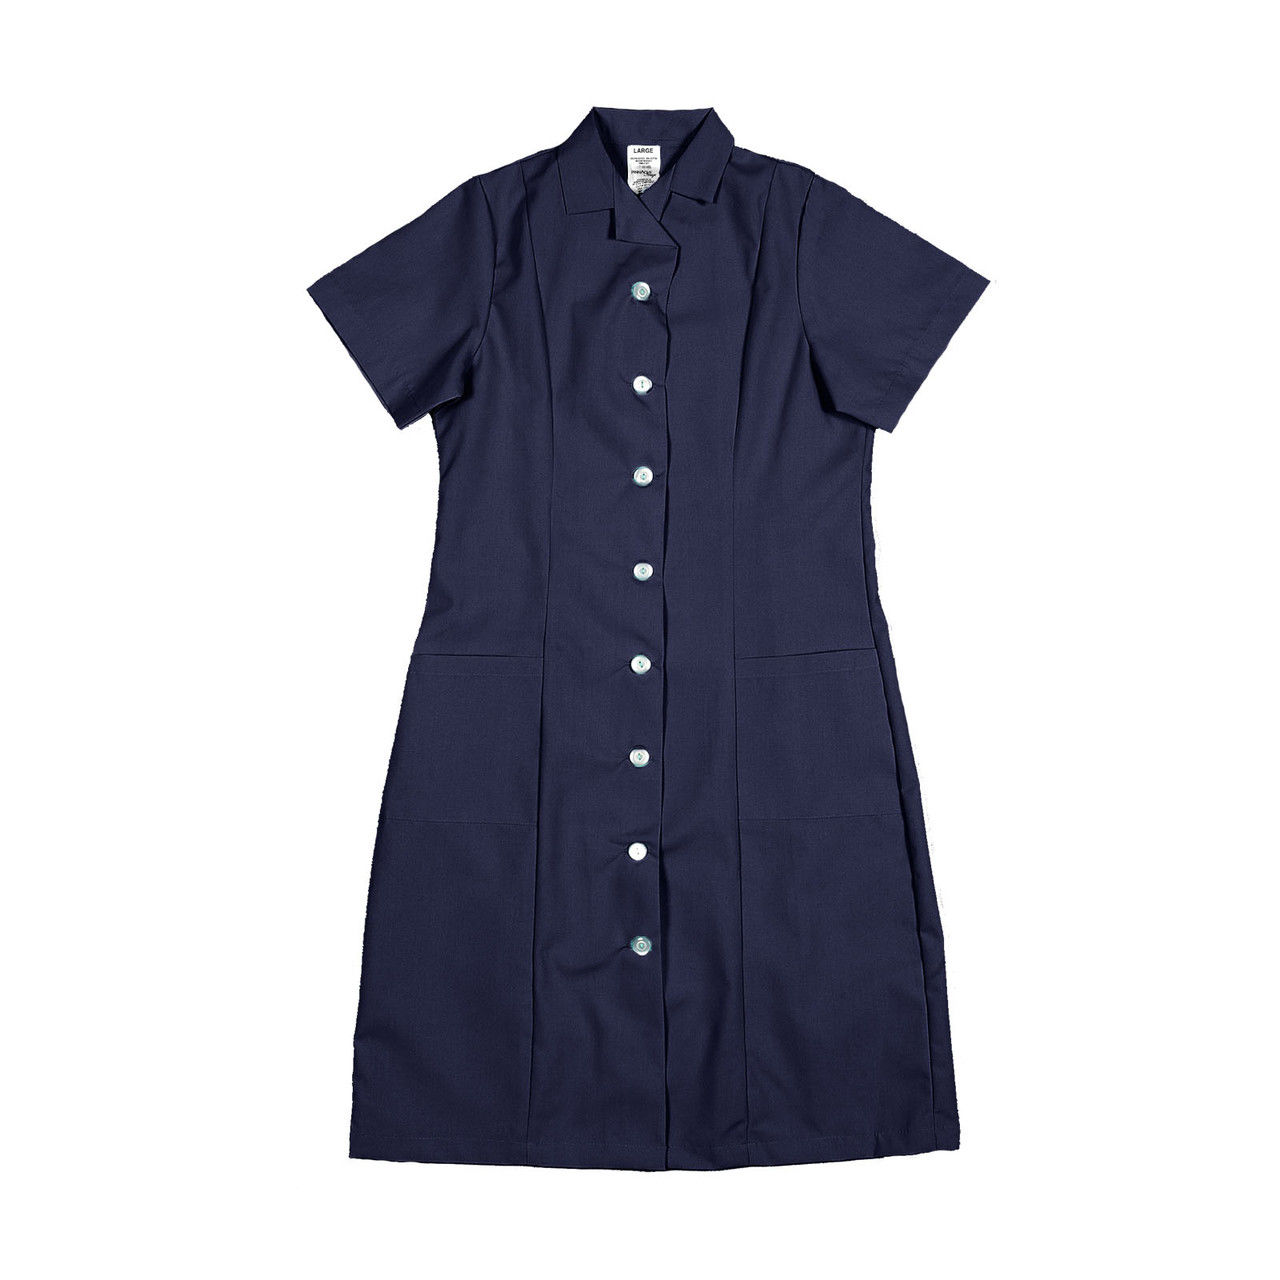 What characteristics does the light blue uniform dress share with the Navy Blue Princess Dress fabric?